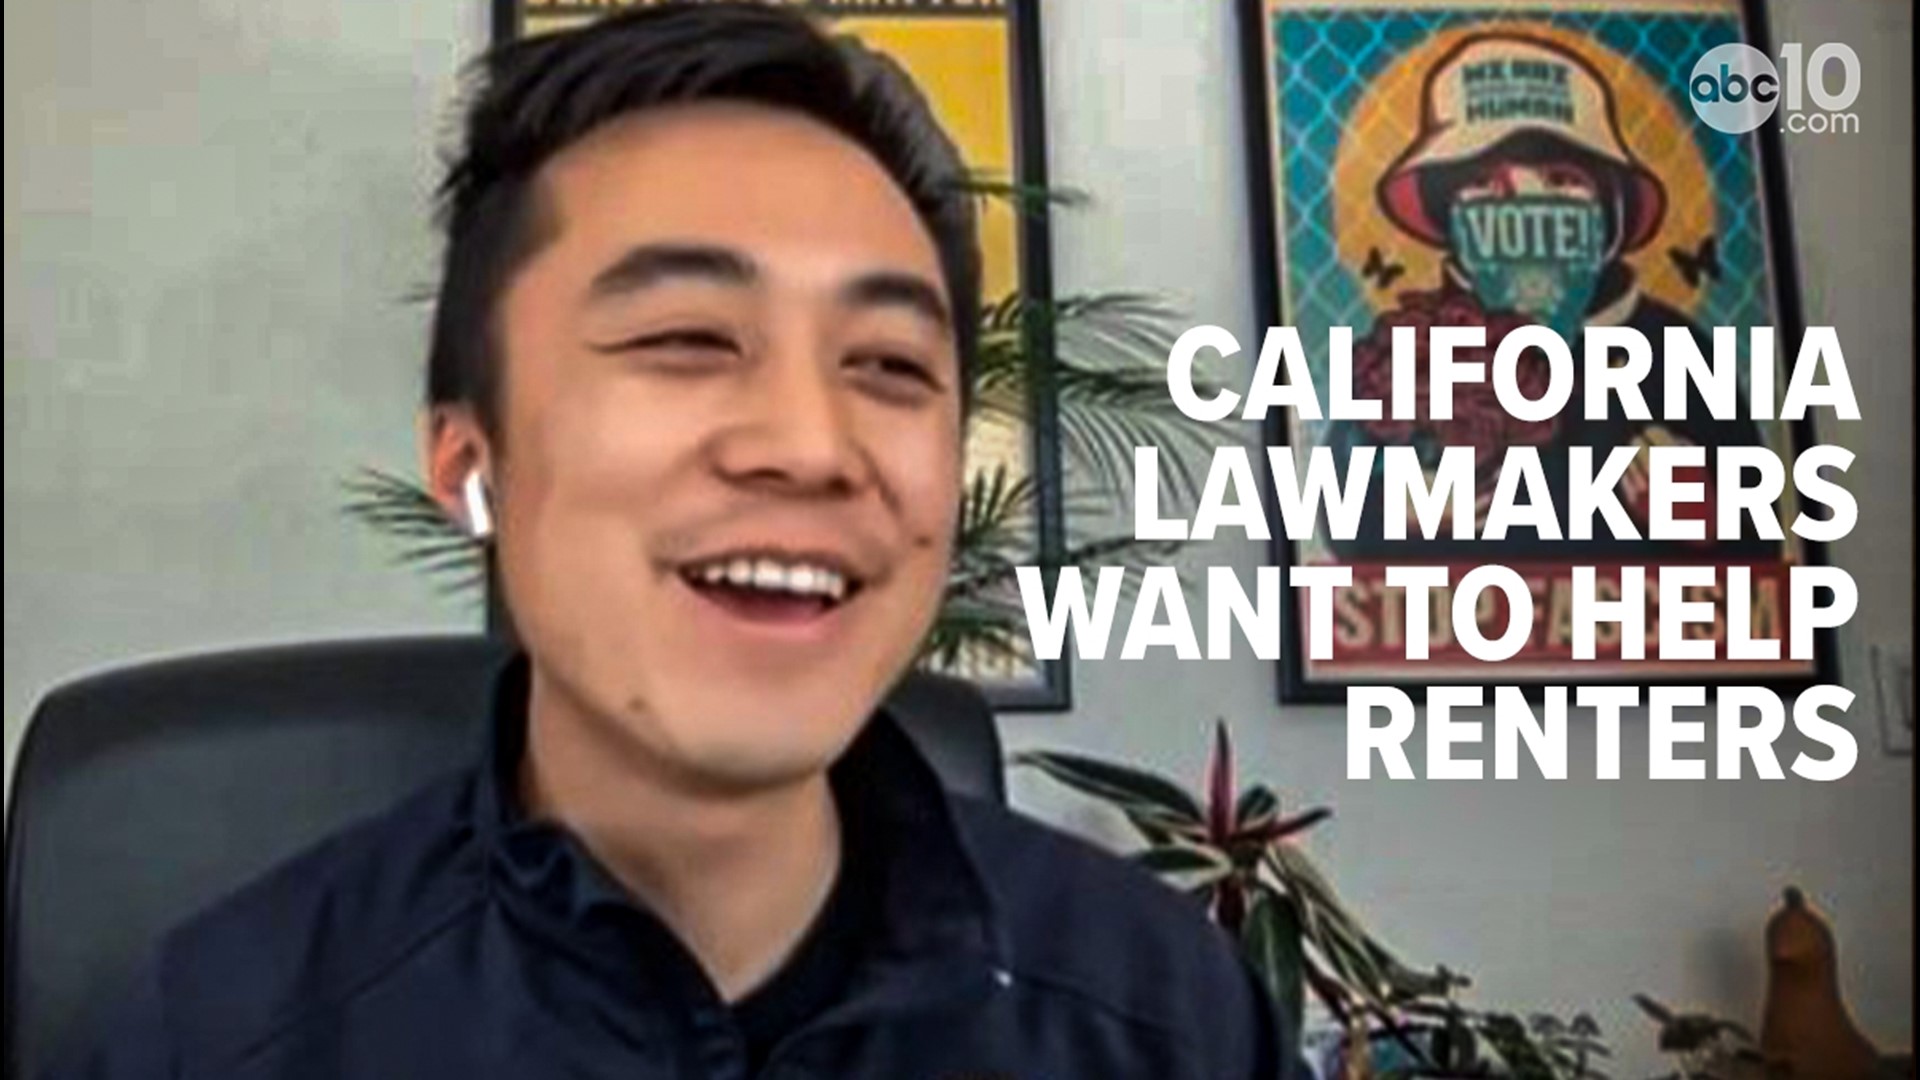 The three California lawmakers in the State Legislature are hoping to hold listening sessions with renters to best address their current problems.